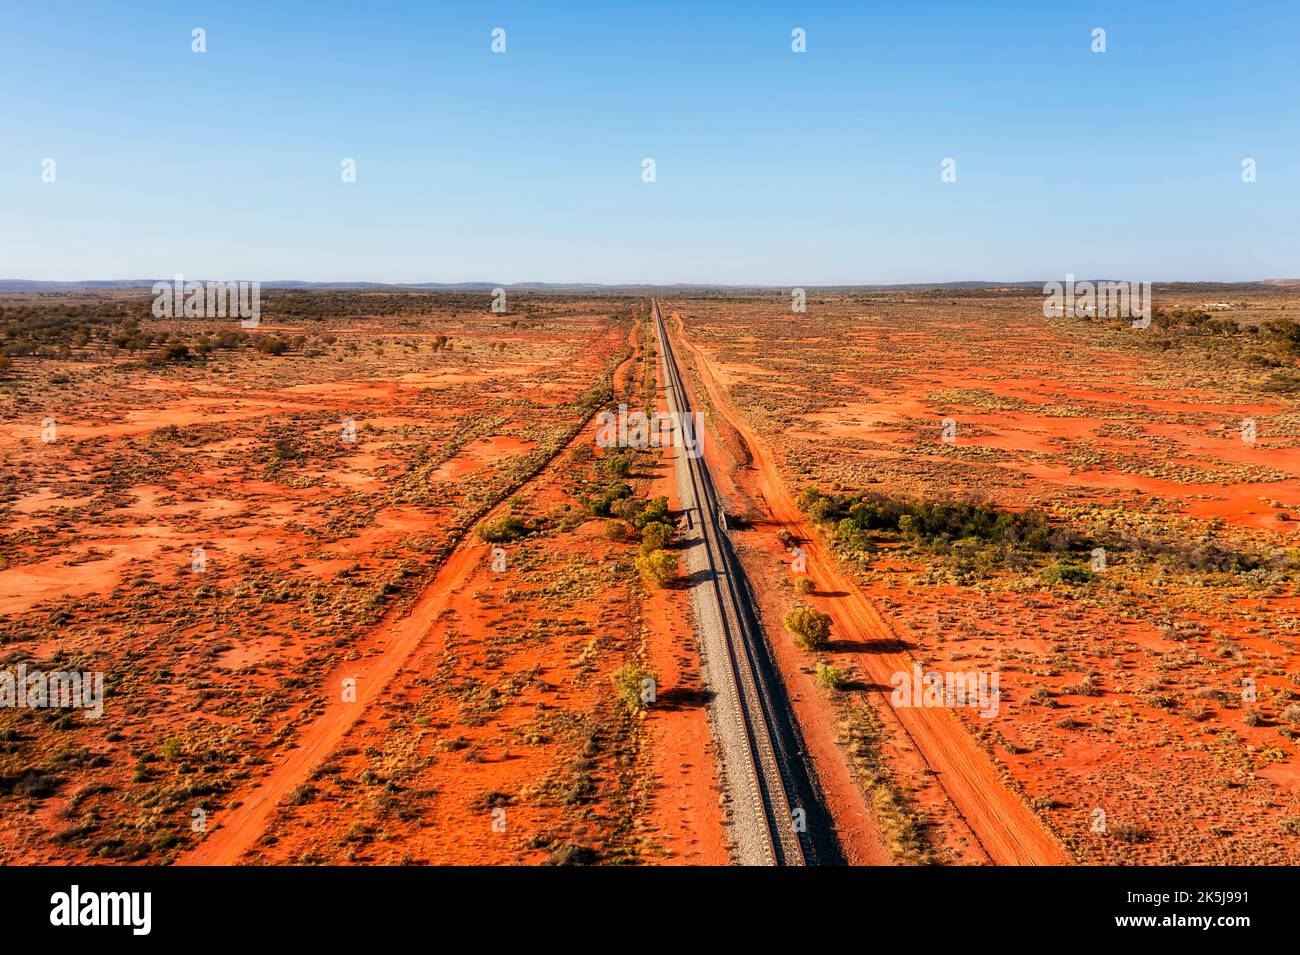 Remote red soil Australian outback with single line of railway to Broken Hill city - aerial mid-air landscape view. Stock Photo